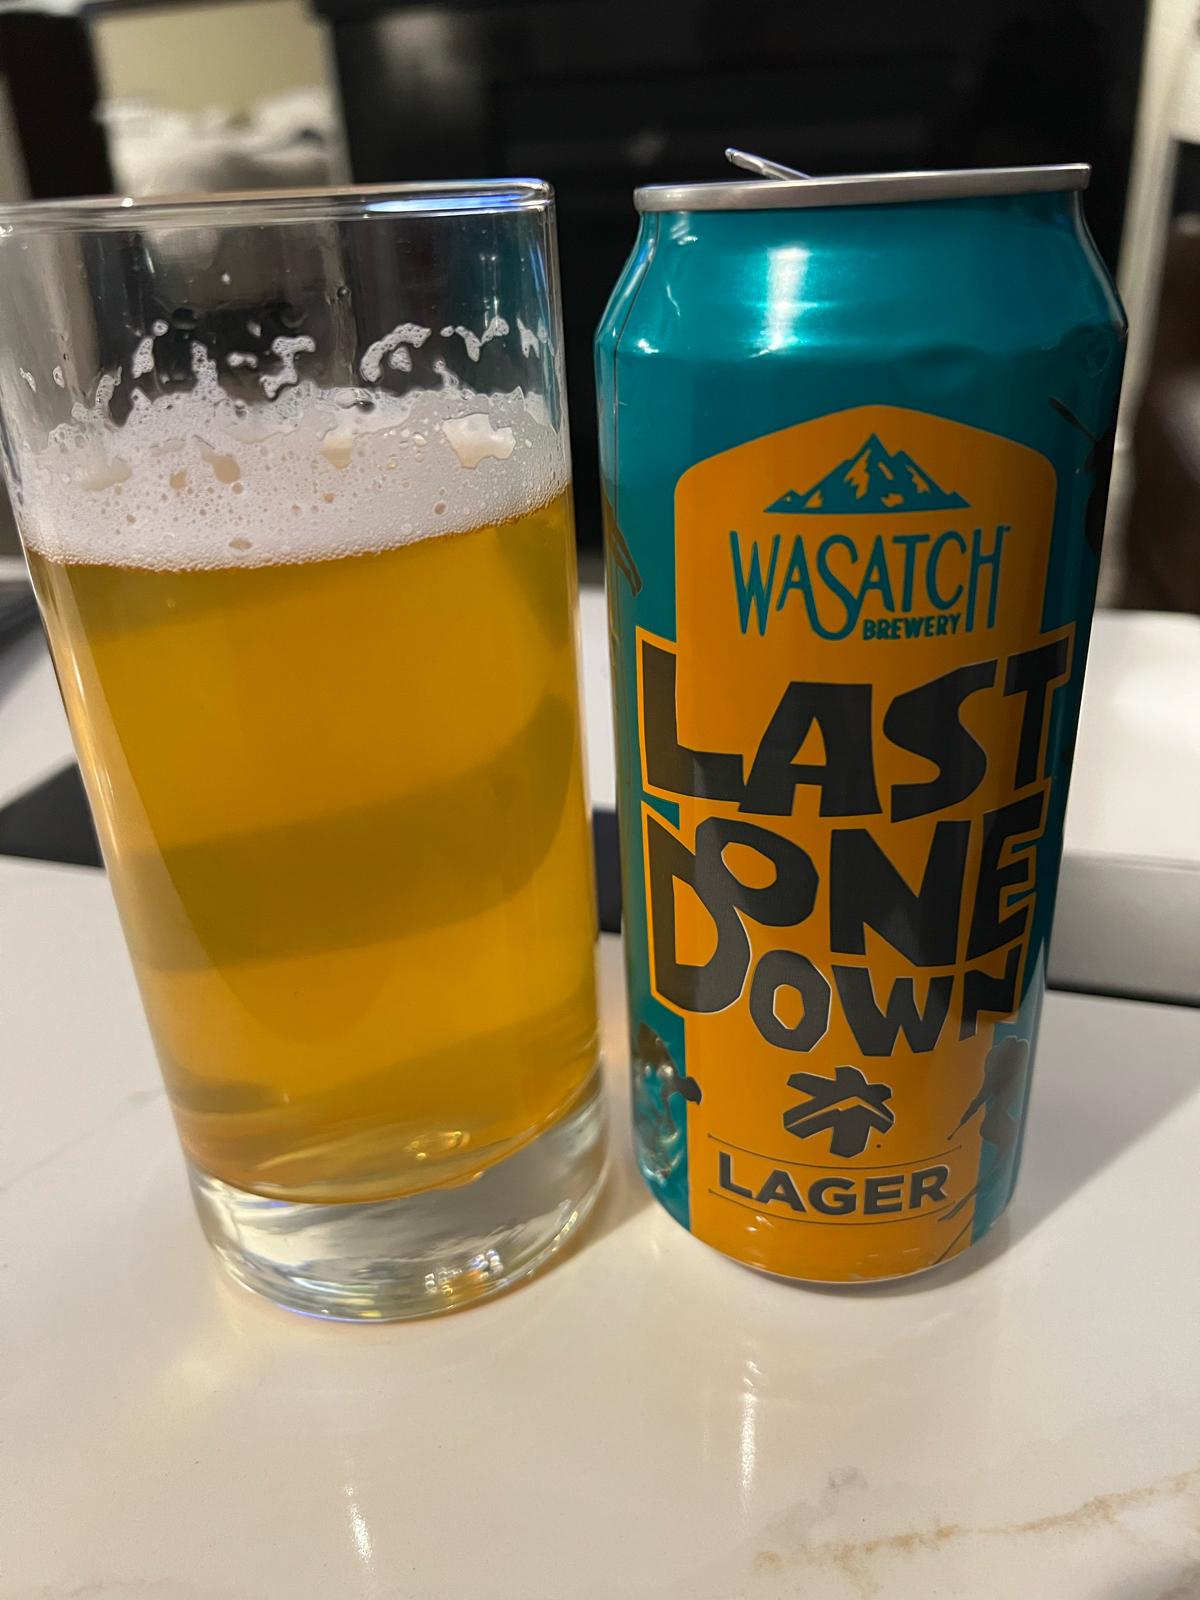 Last One Down - Lager